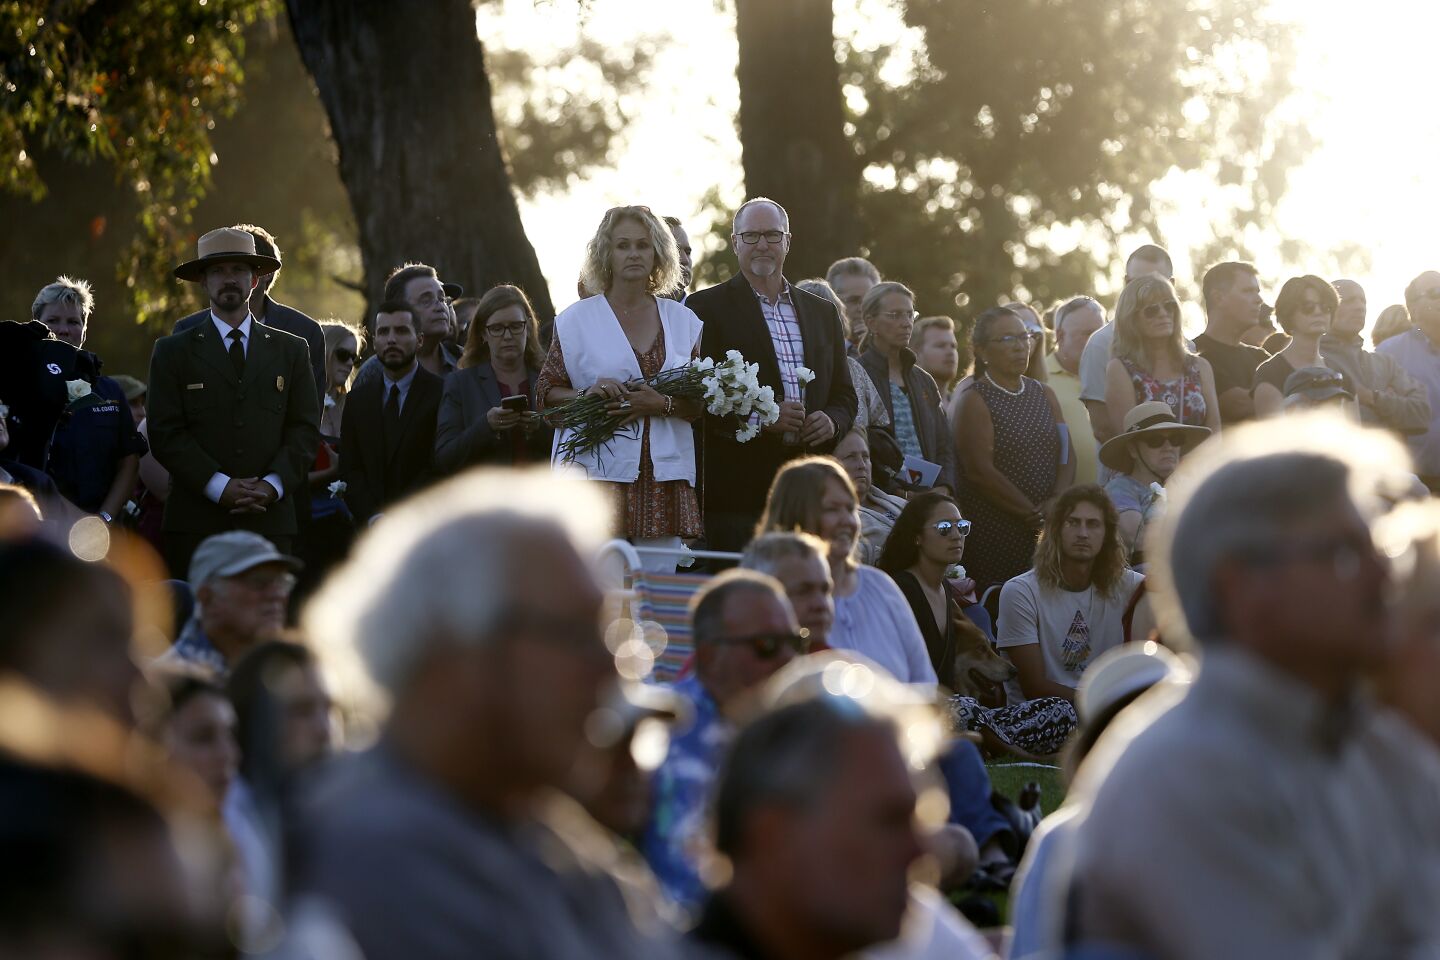 Mourners gather for a vigil at Chase Palm Park in Santa Barbara on Friday evening honoring the victims of the Conception boat fire that broke out off Santa Cruz Island before dawn Monday and claimed 34 lives.